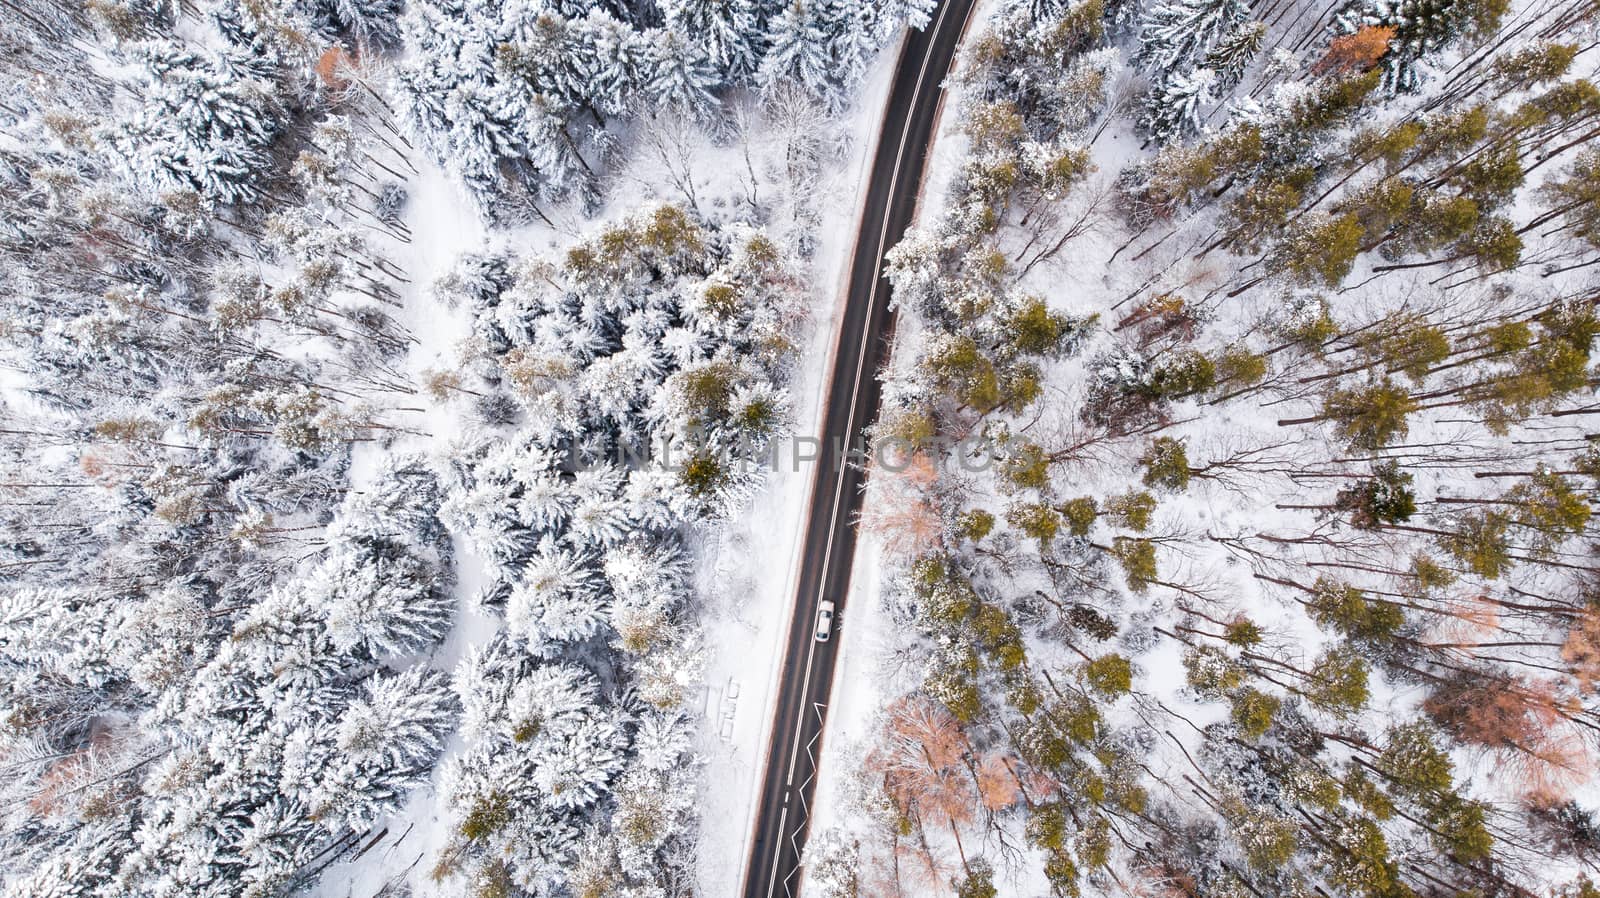 Car Drive Trough Snowy Forest in Winter Wonderland, Top Down Aer by merc67